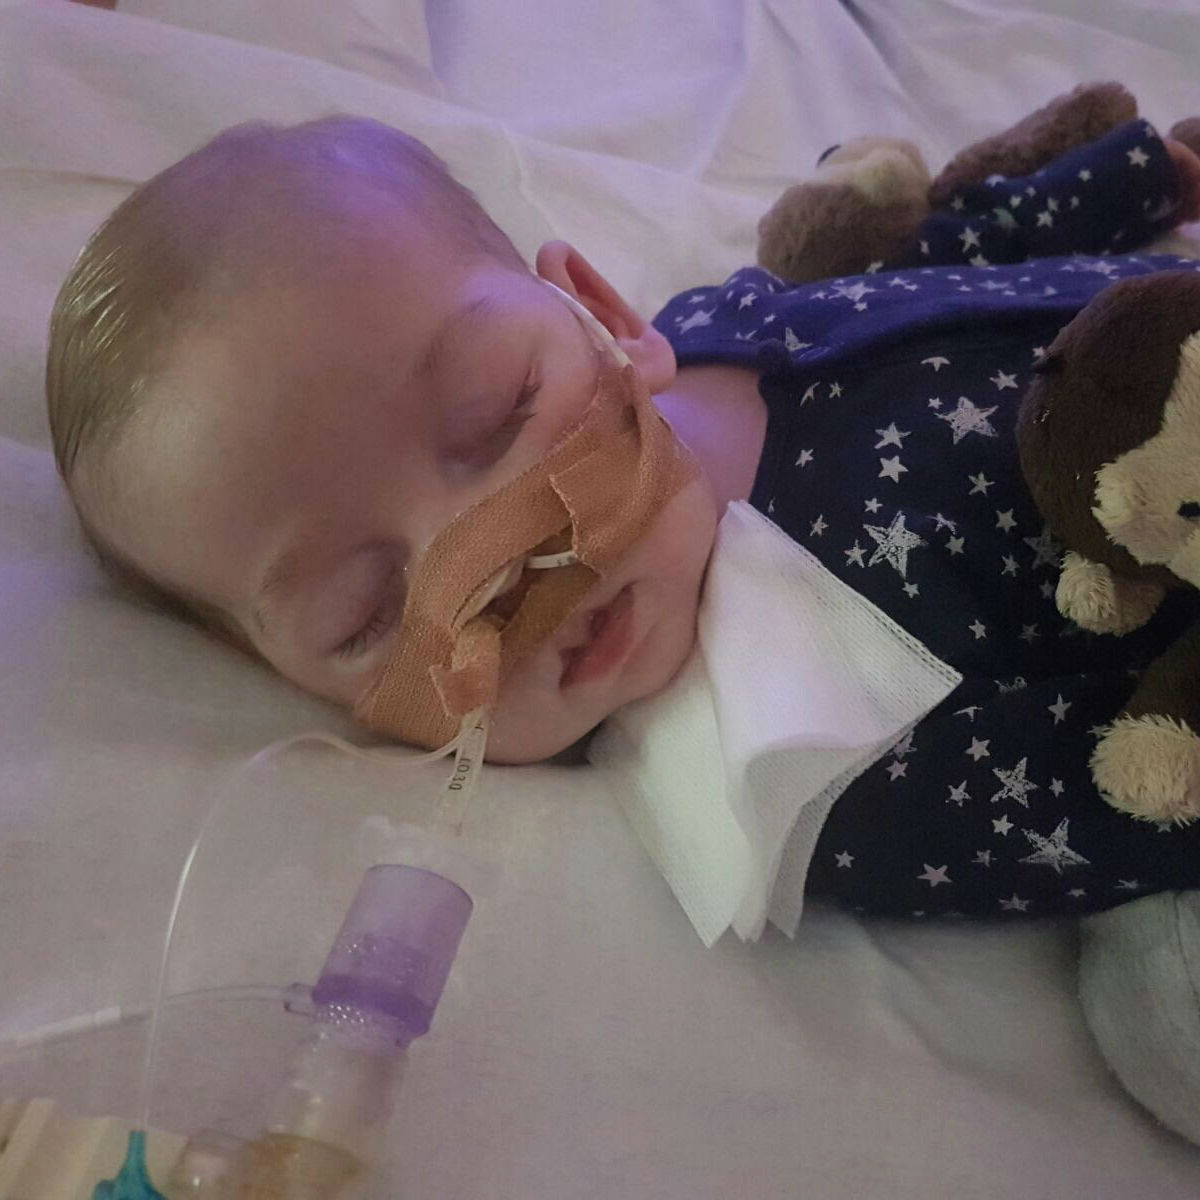 US doctor tells court 10 per cent chance he could improve Charlie Gard's condition